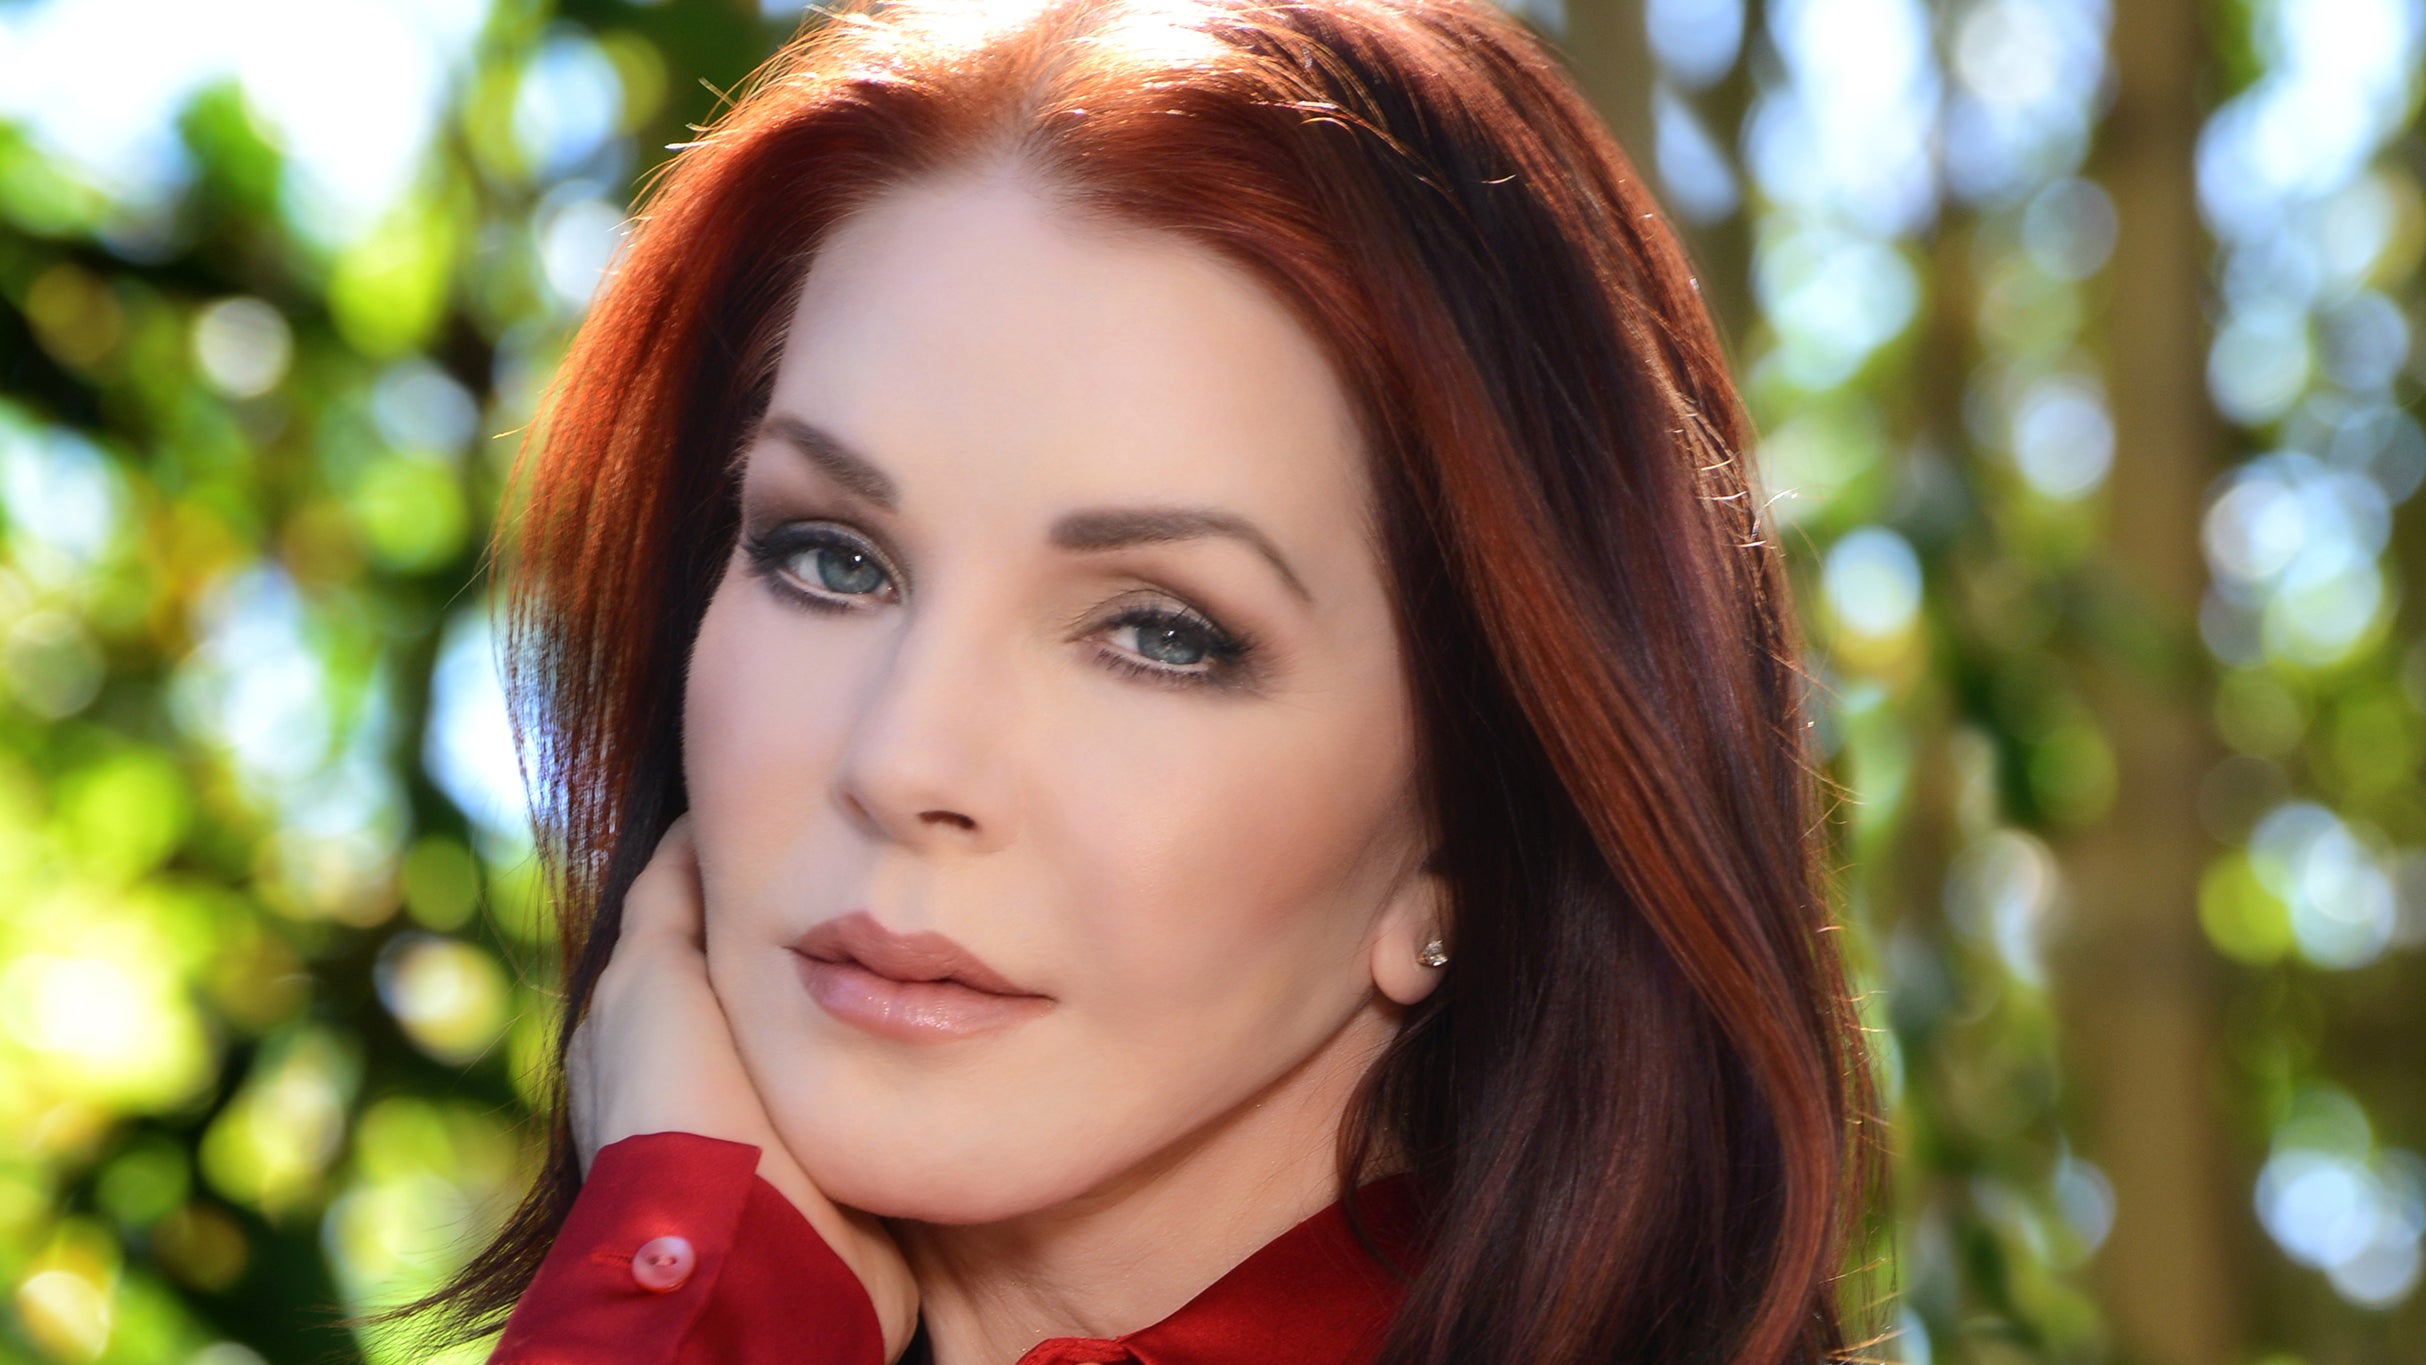 members only presale password for An Evening With Priscilla Presley presale tickets in Gary